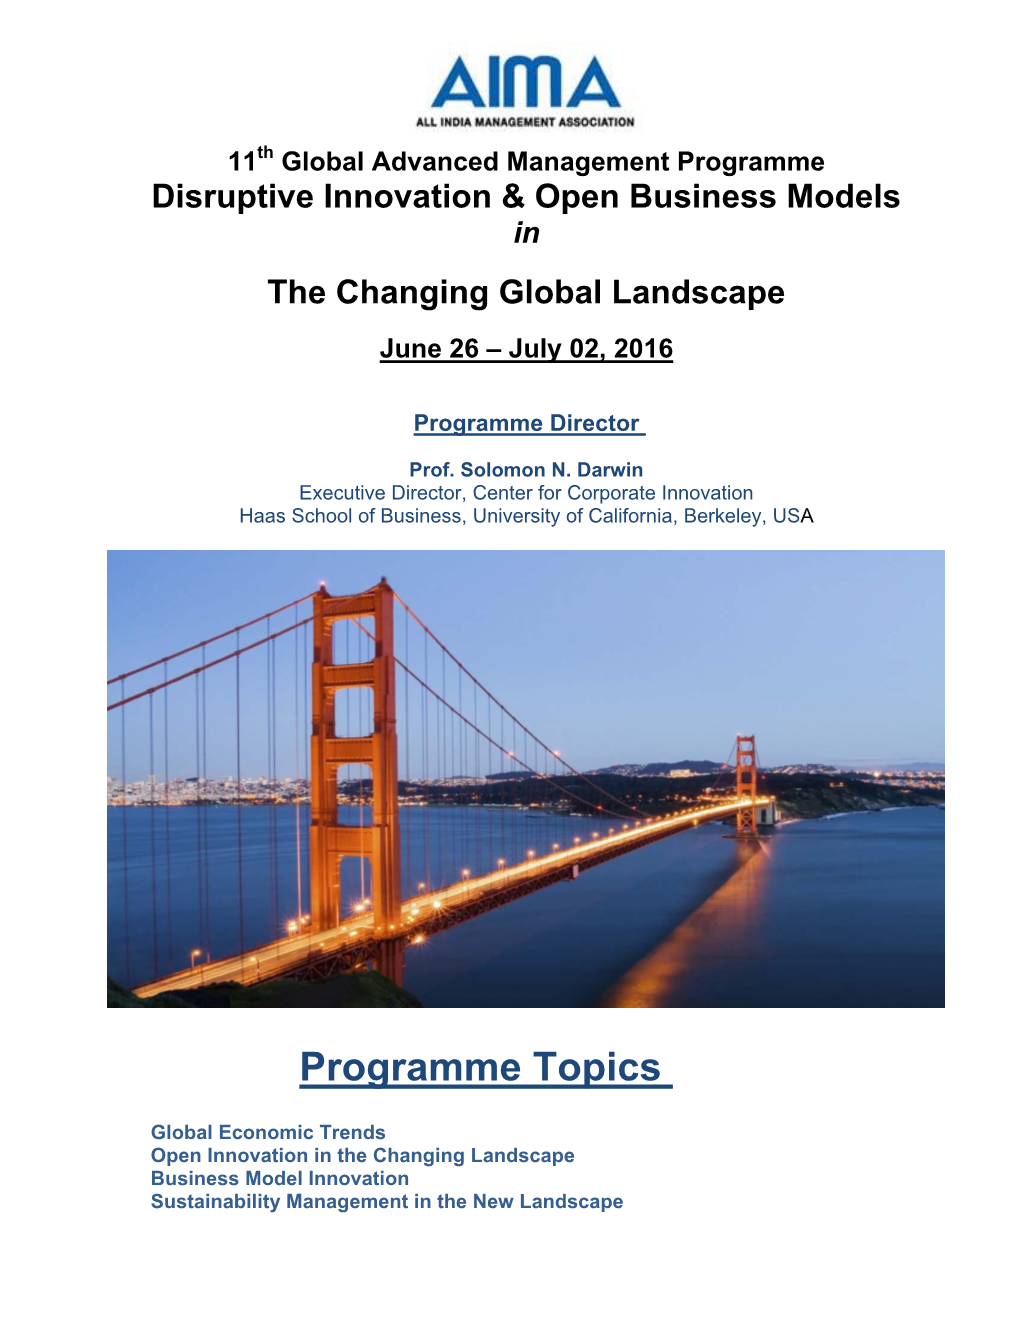 Open Innovation in the Changing Landscape Business Model Innovation Sustainability Management in the New Landscape